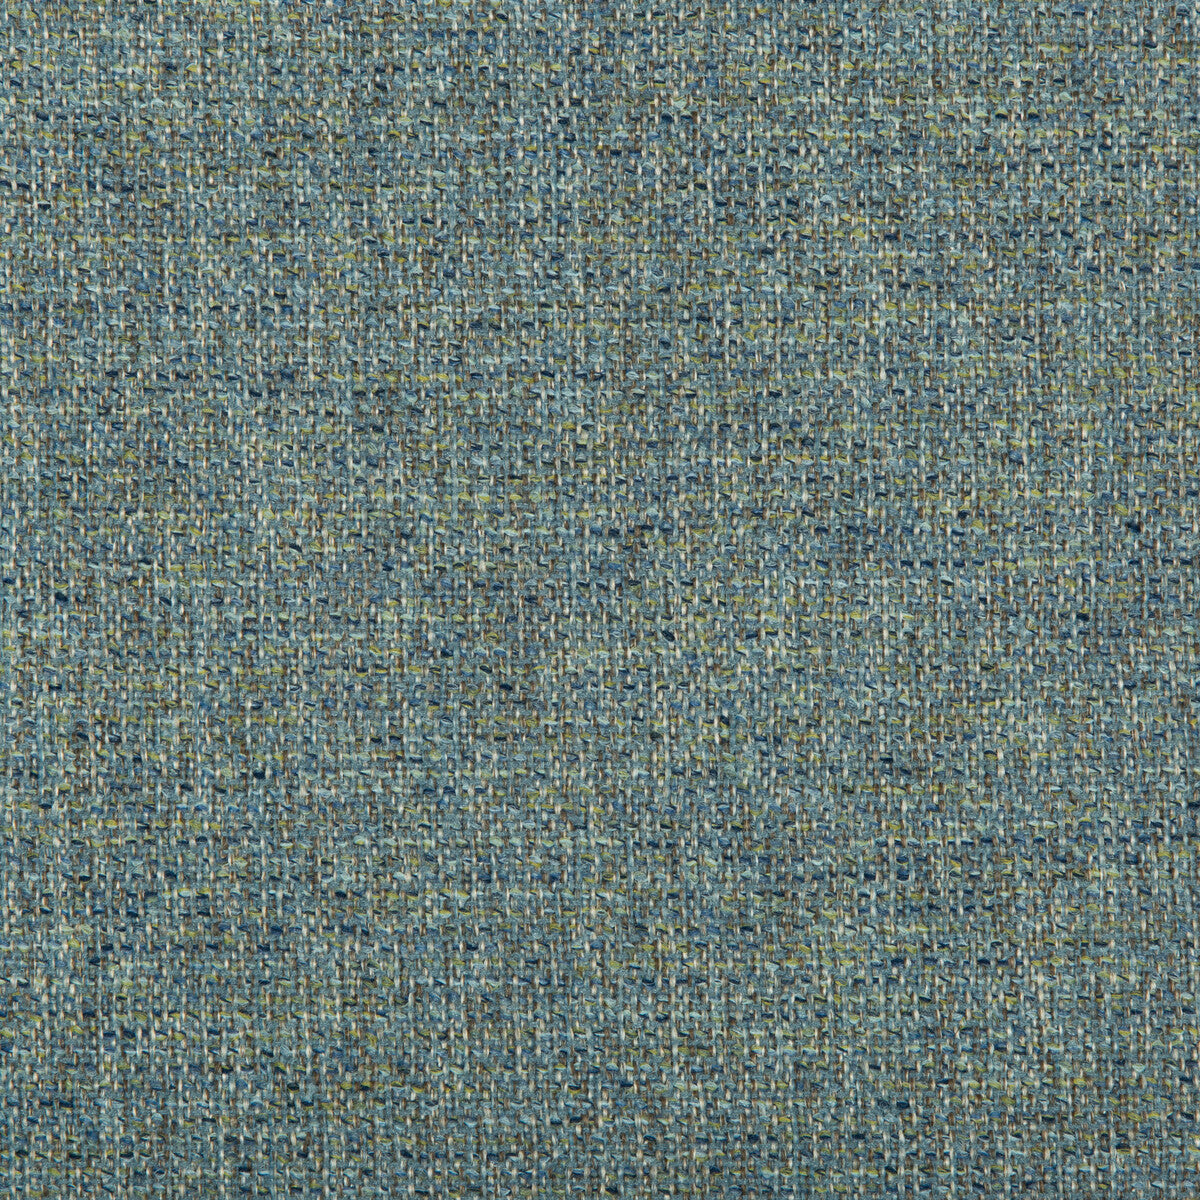 Kravet Contract fabric in 35442-35 color - pattern 35442.35.0 - by Kravet Contract